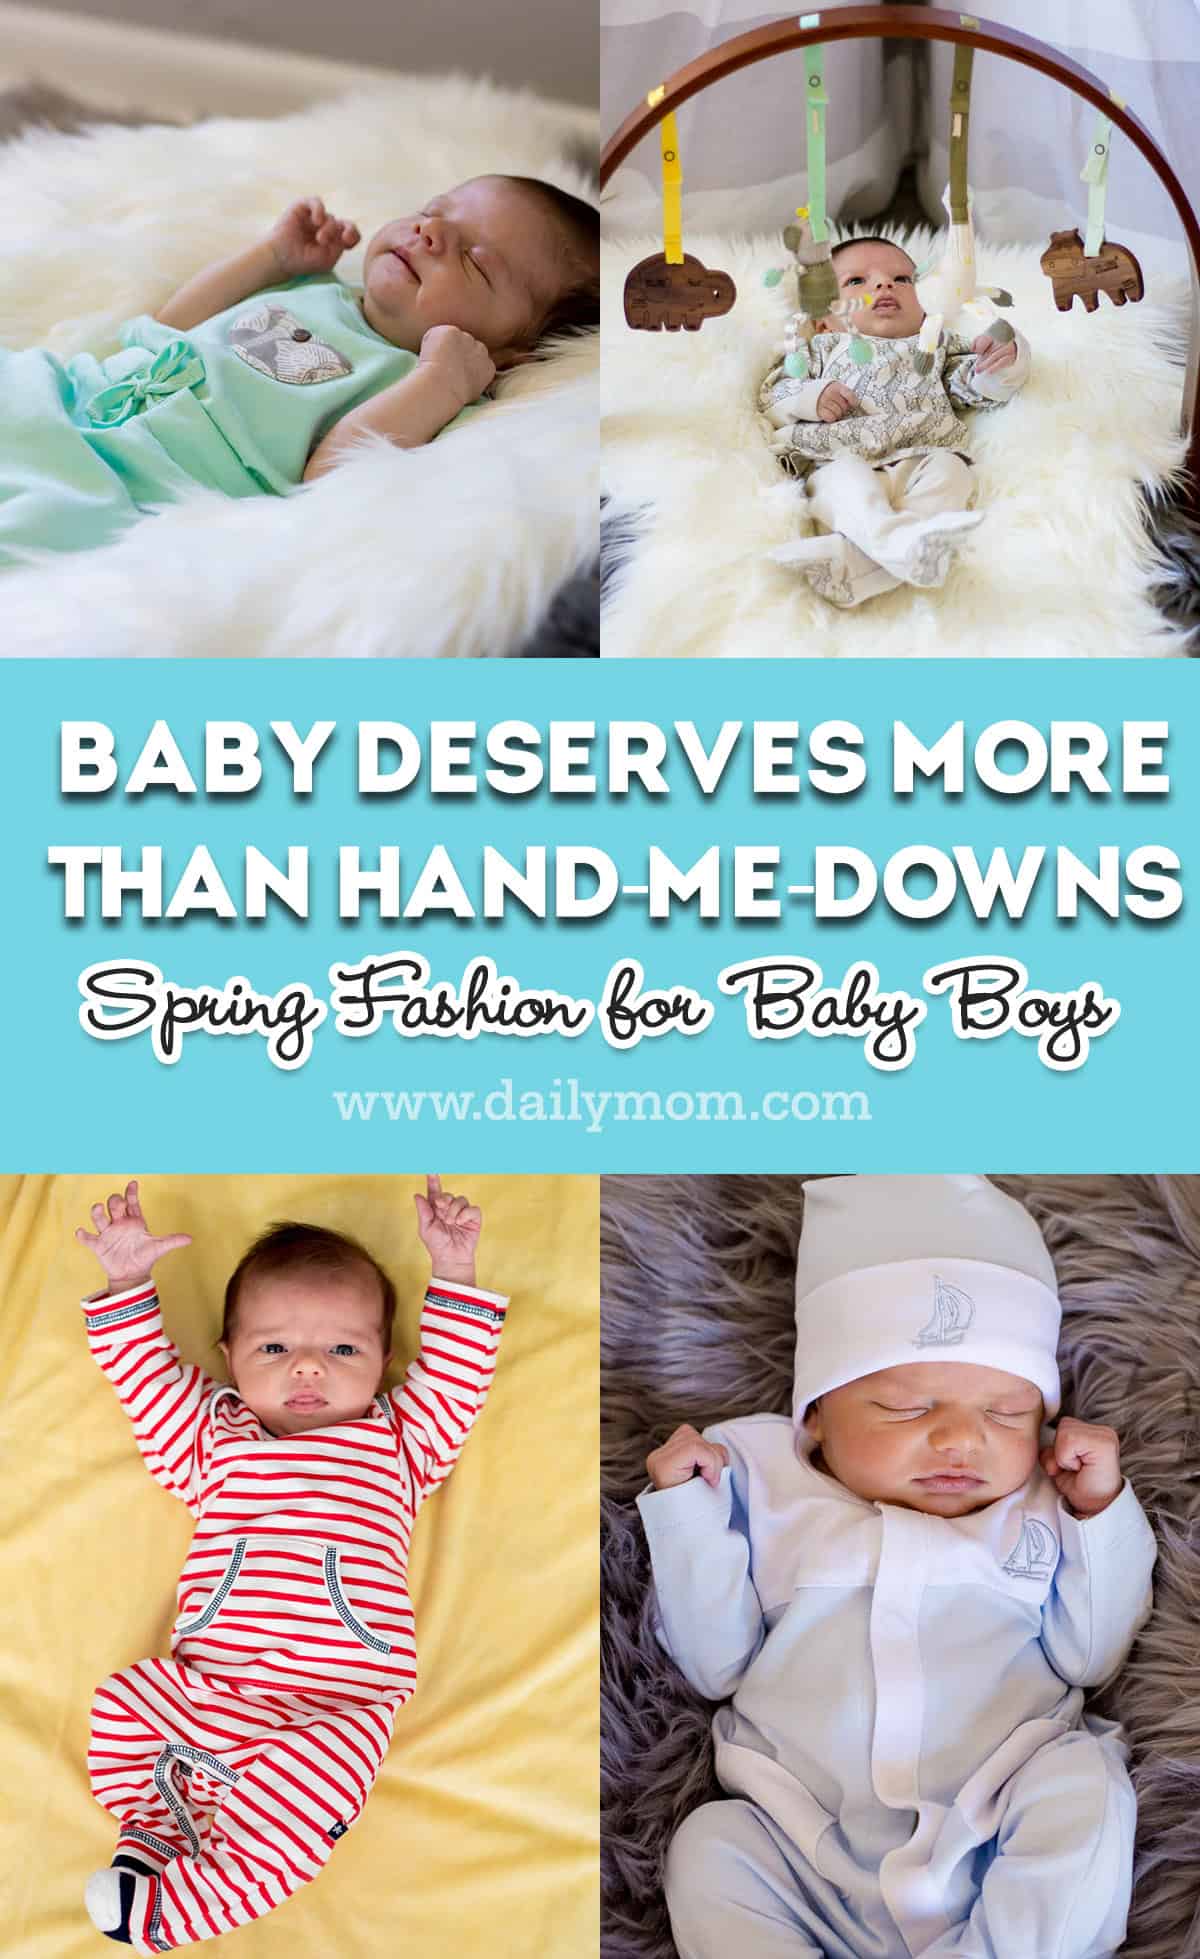 Baby Deserves More Than Hand-Me-Downs - Spring Fashion For Baby Boys 5 Daily Mom, Magazine For Families